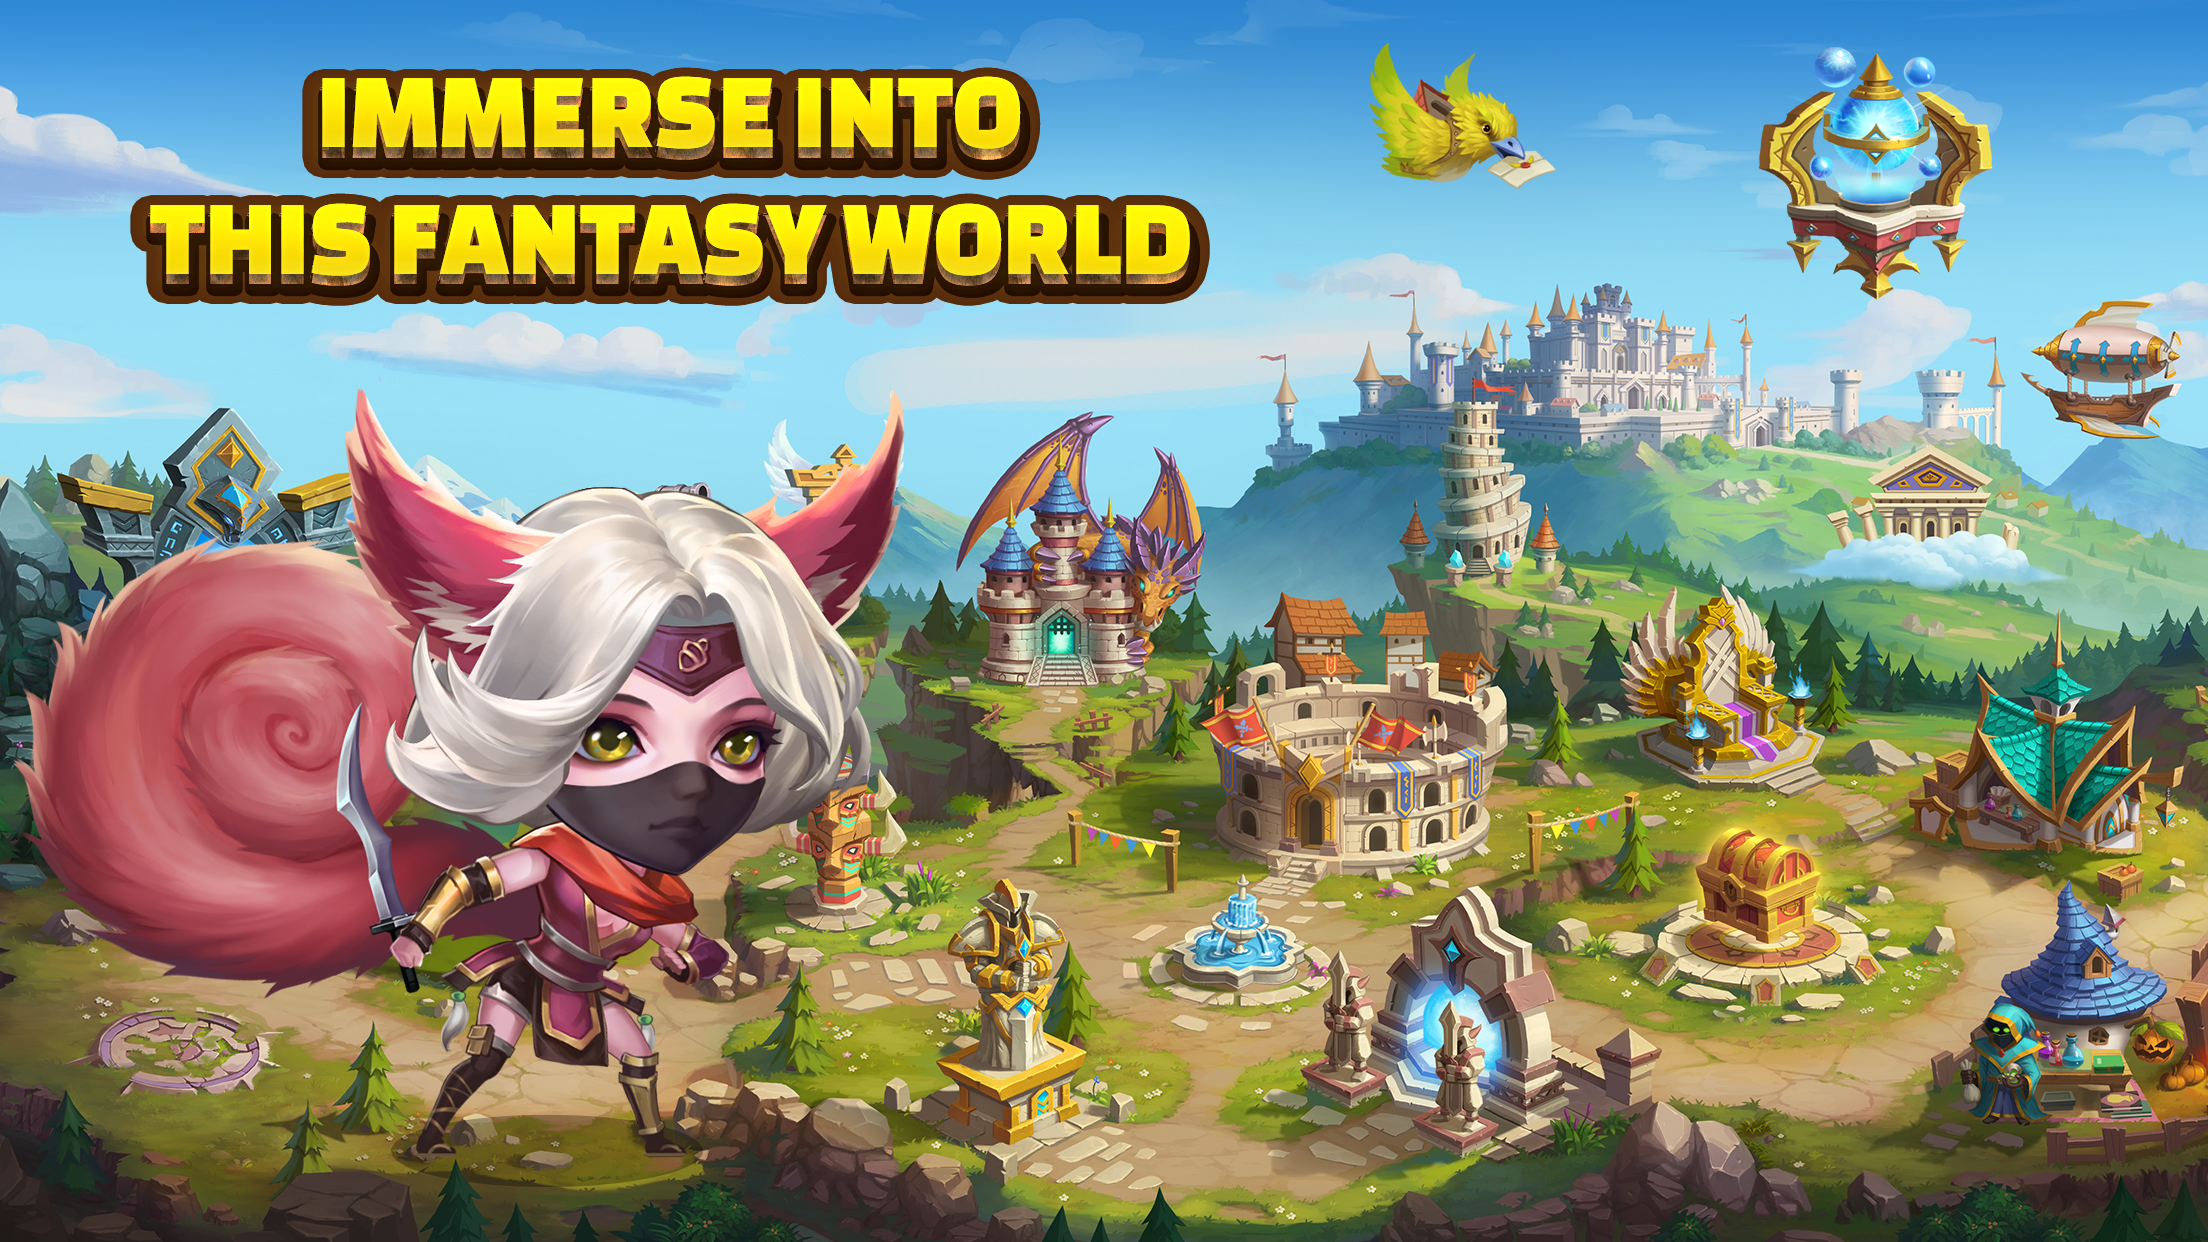 Heroes Charge Hd Apk 2.1.379 For Android – Download Heroes Charge Hd Xapk  (Apk Bundle) Latest Version From Apkfab.Com